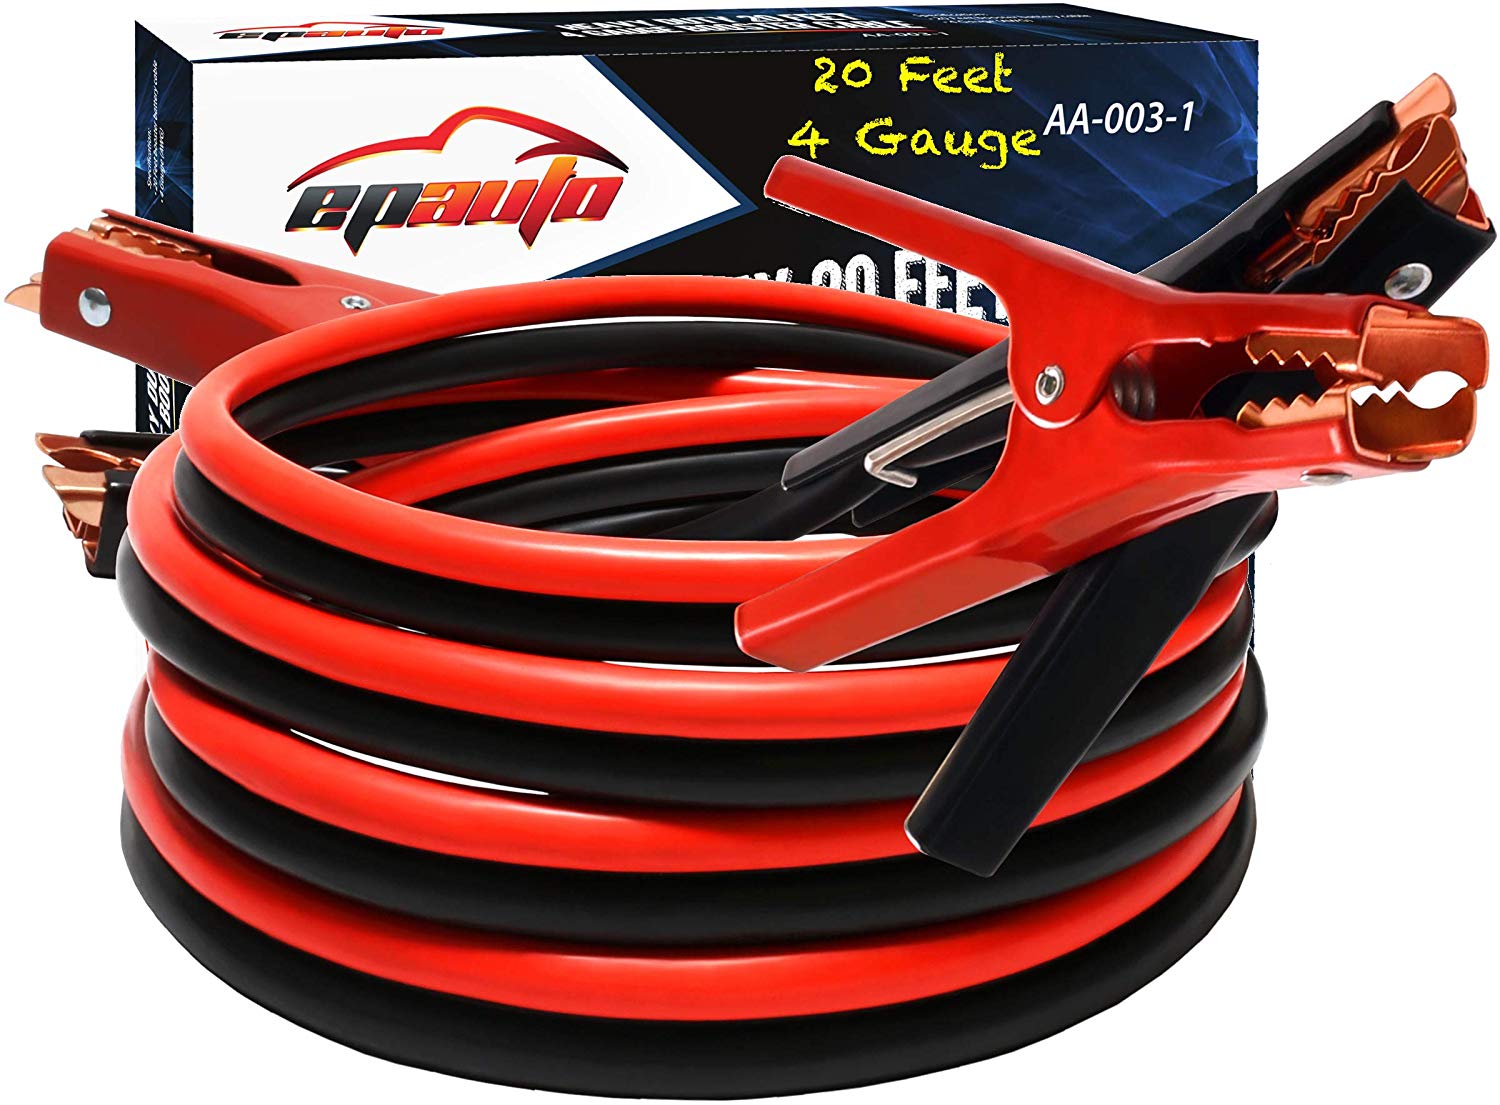 EPAuto 4 Gauge x 20 Ft 500A Heavy Duty Booster Jumper Cables with Travel Bag and Safety Gloves